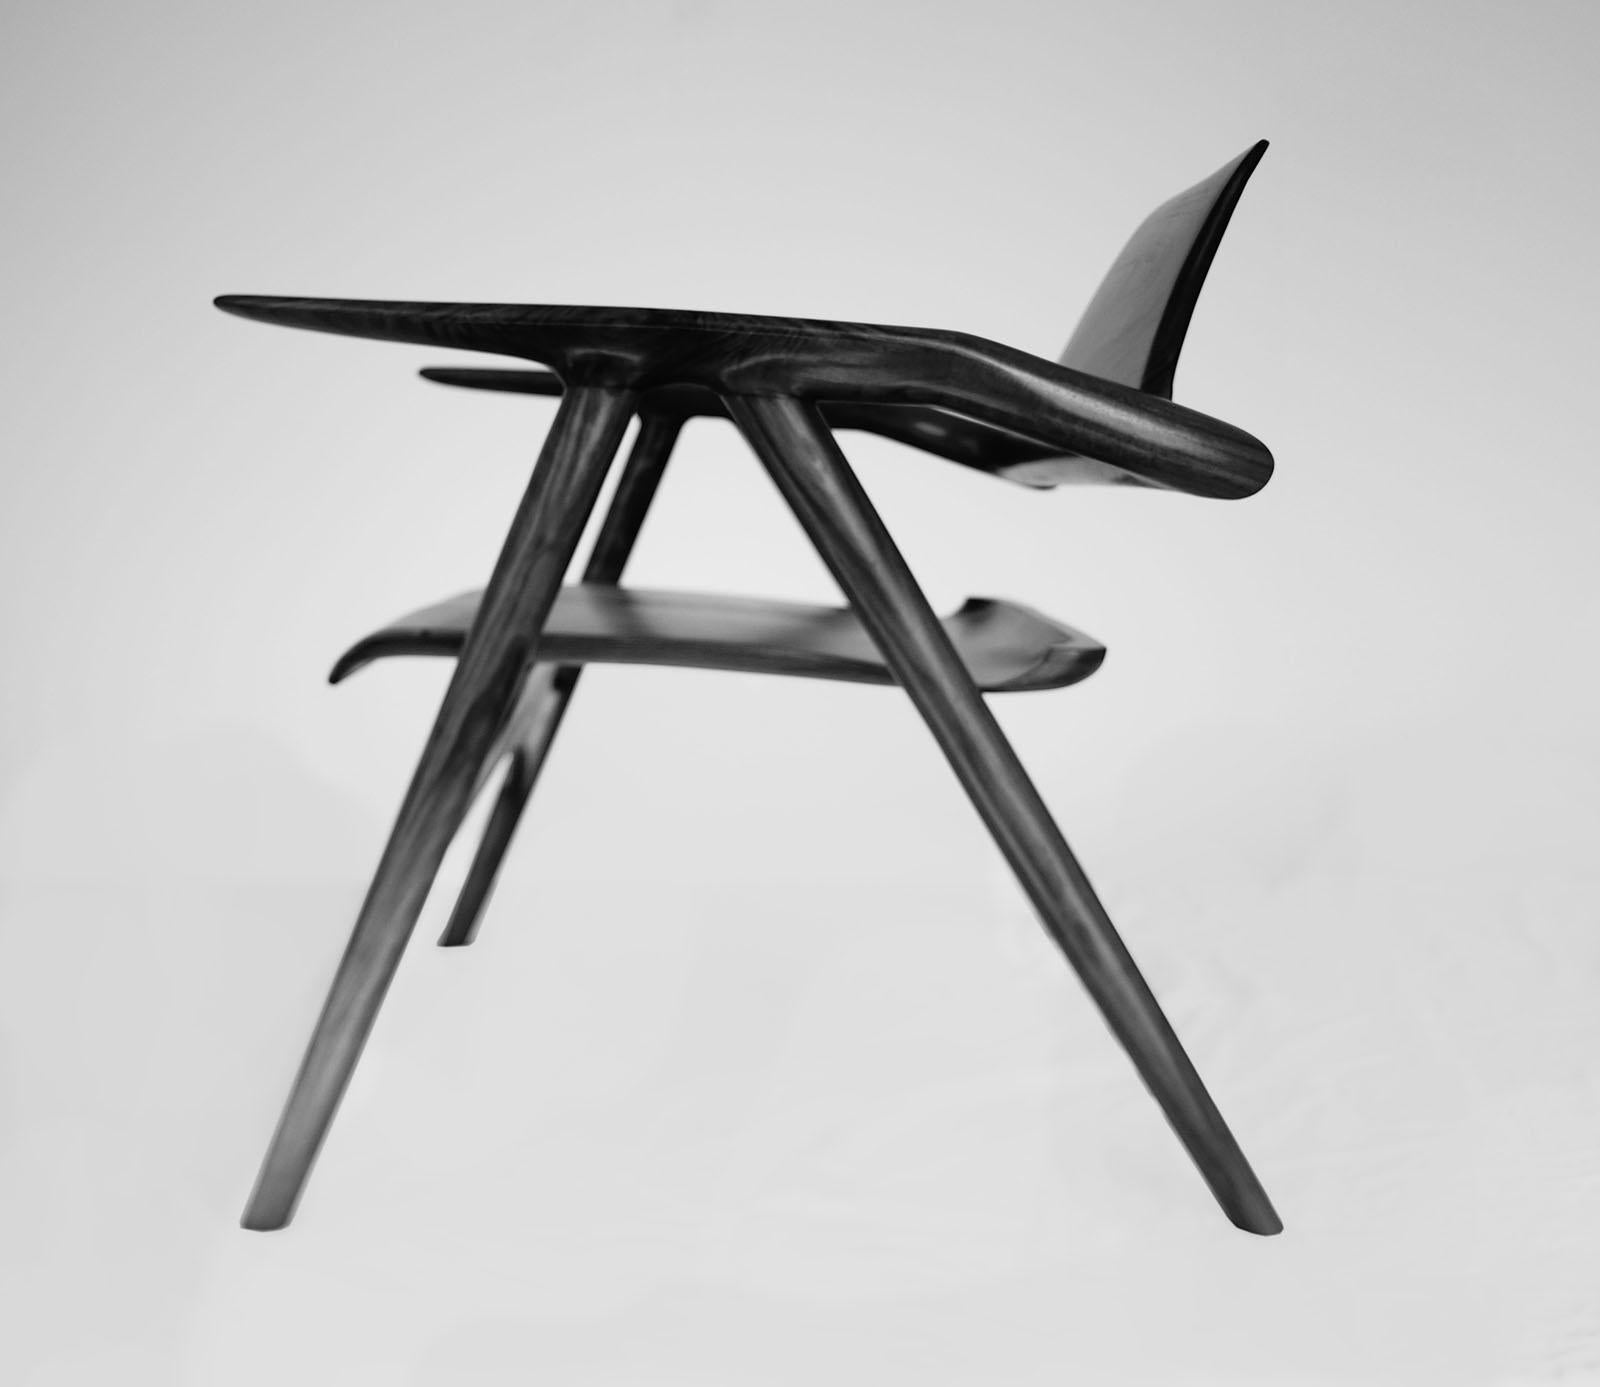 Mantis Chair in Walnut Wood, Hand-Sculpted Chair by Kokora For Sale 1